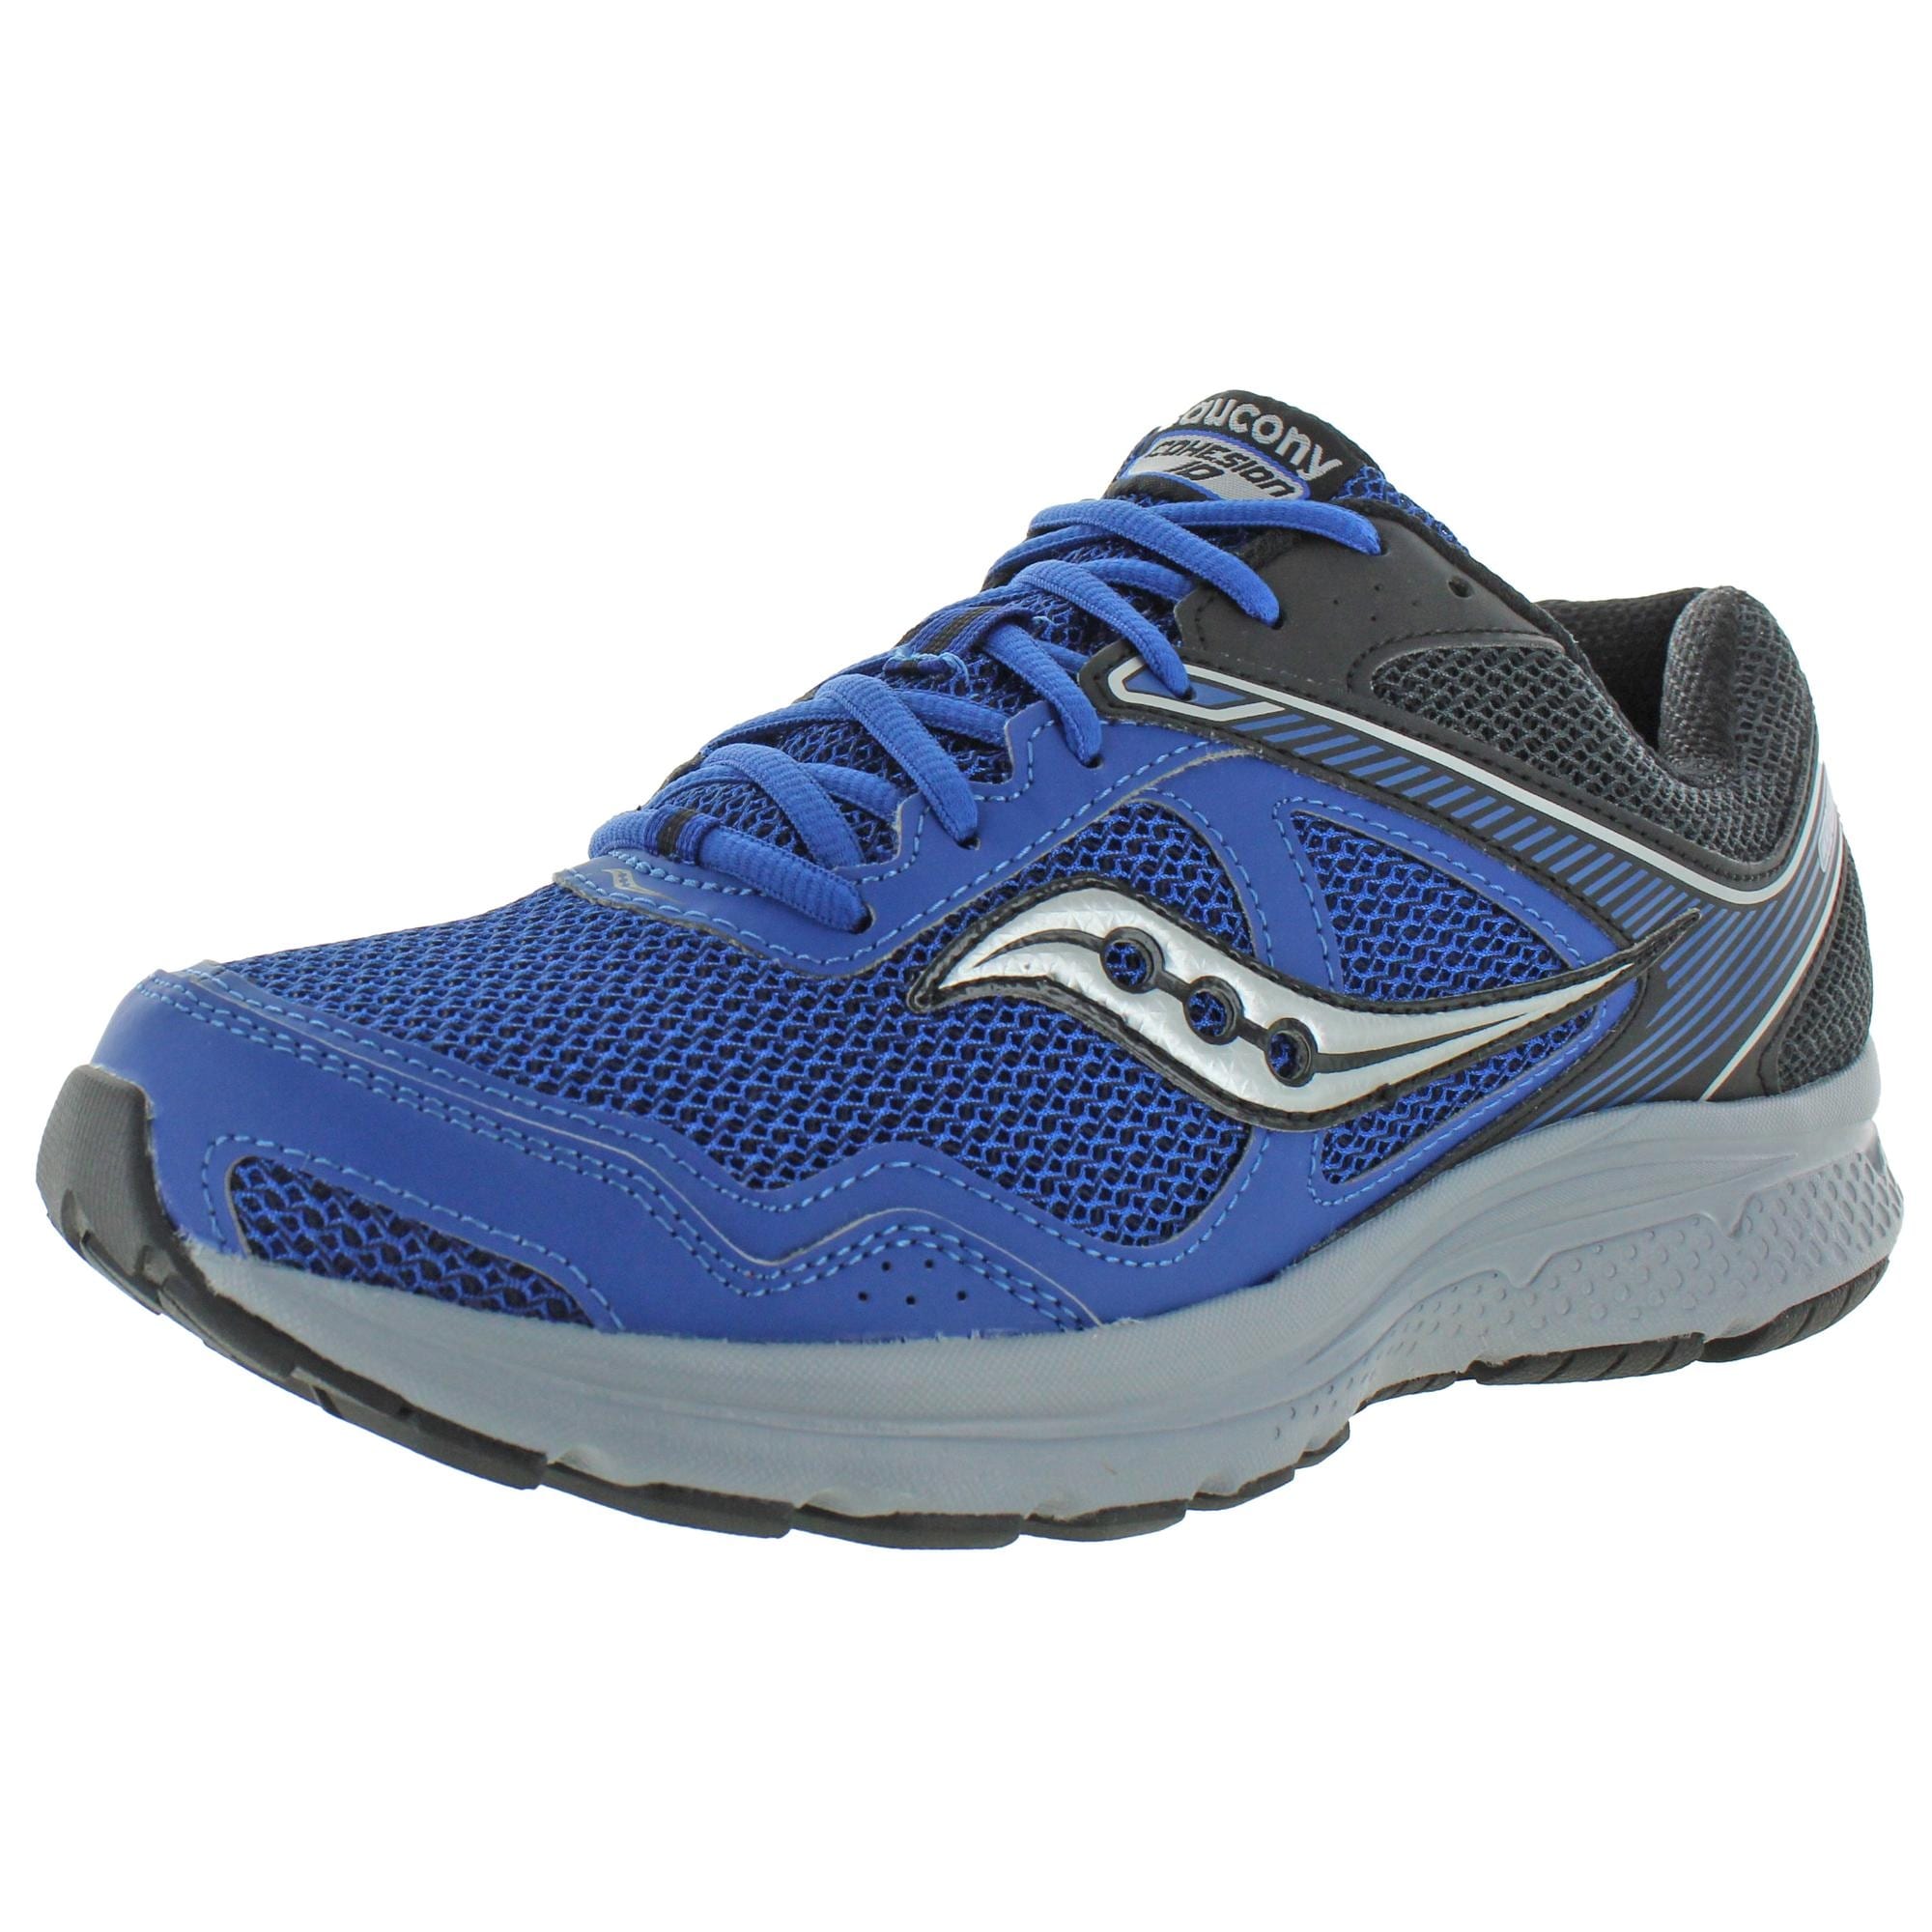 saucony grid cohesion 10 men's running shoes